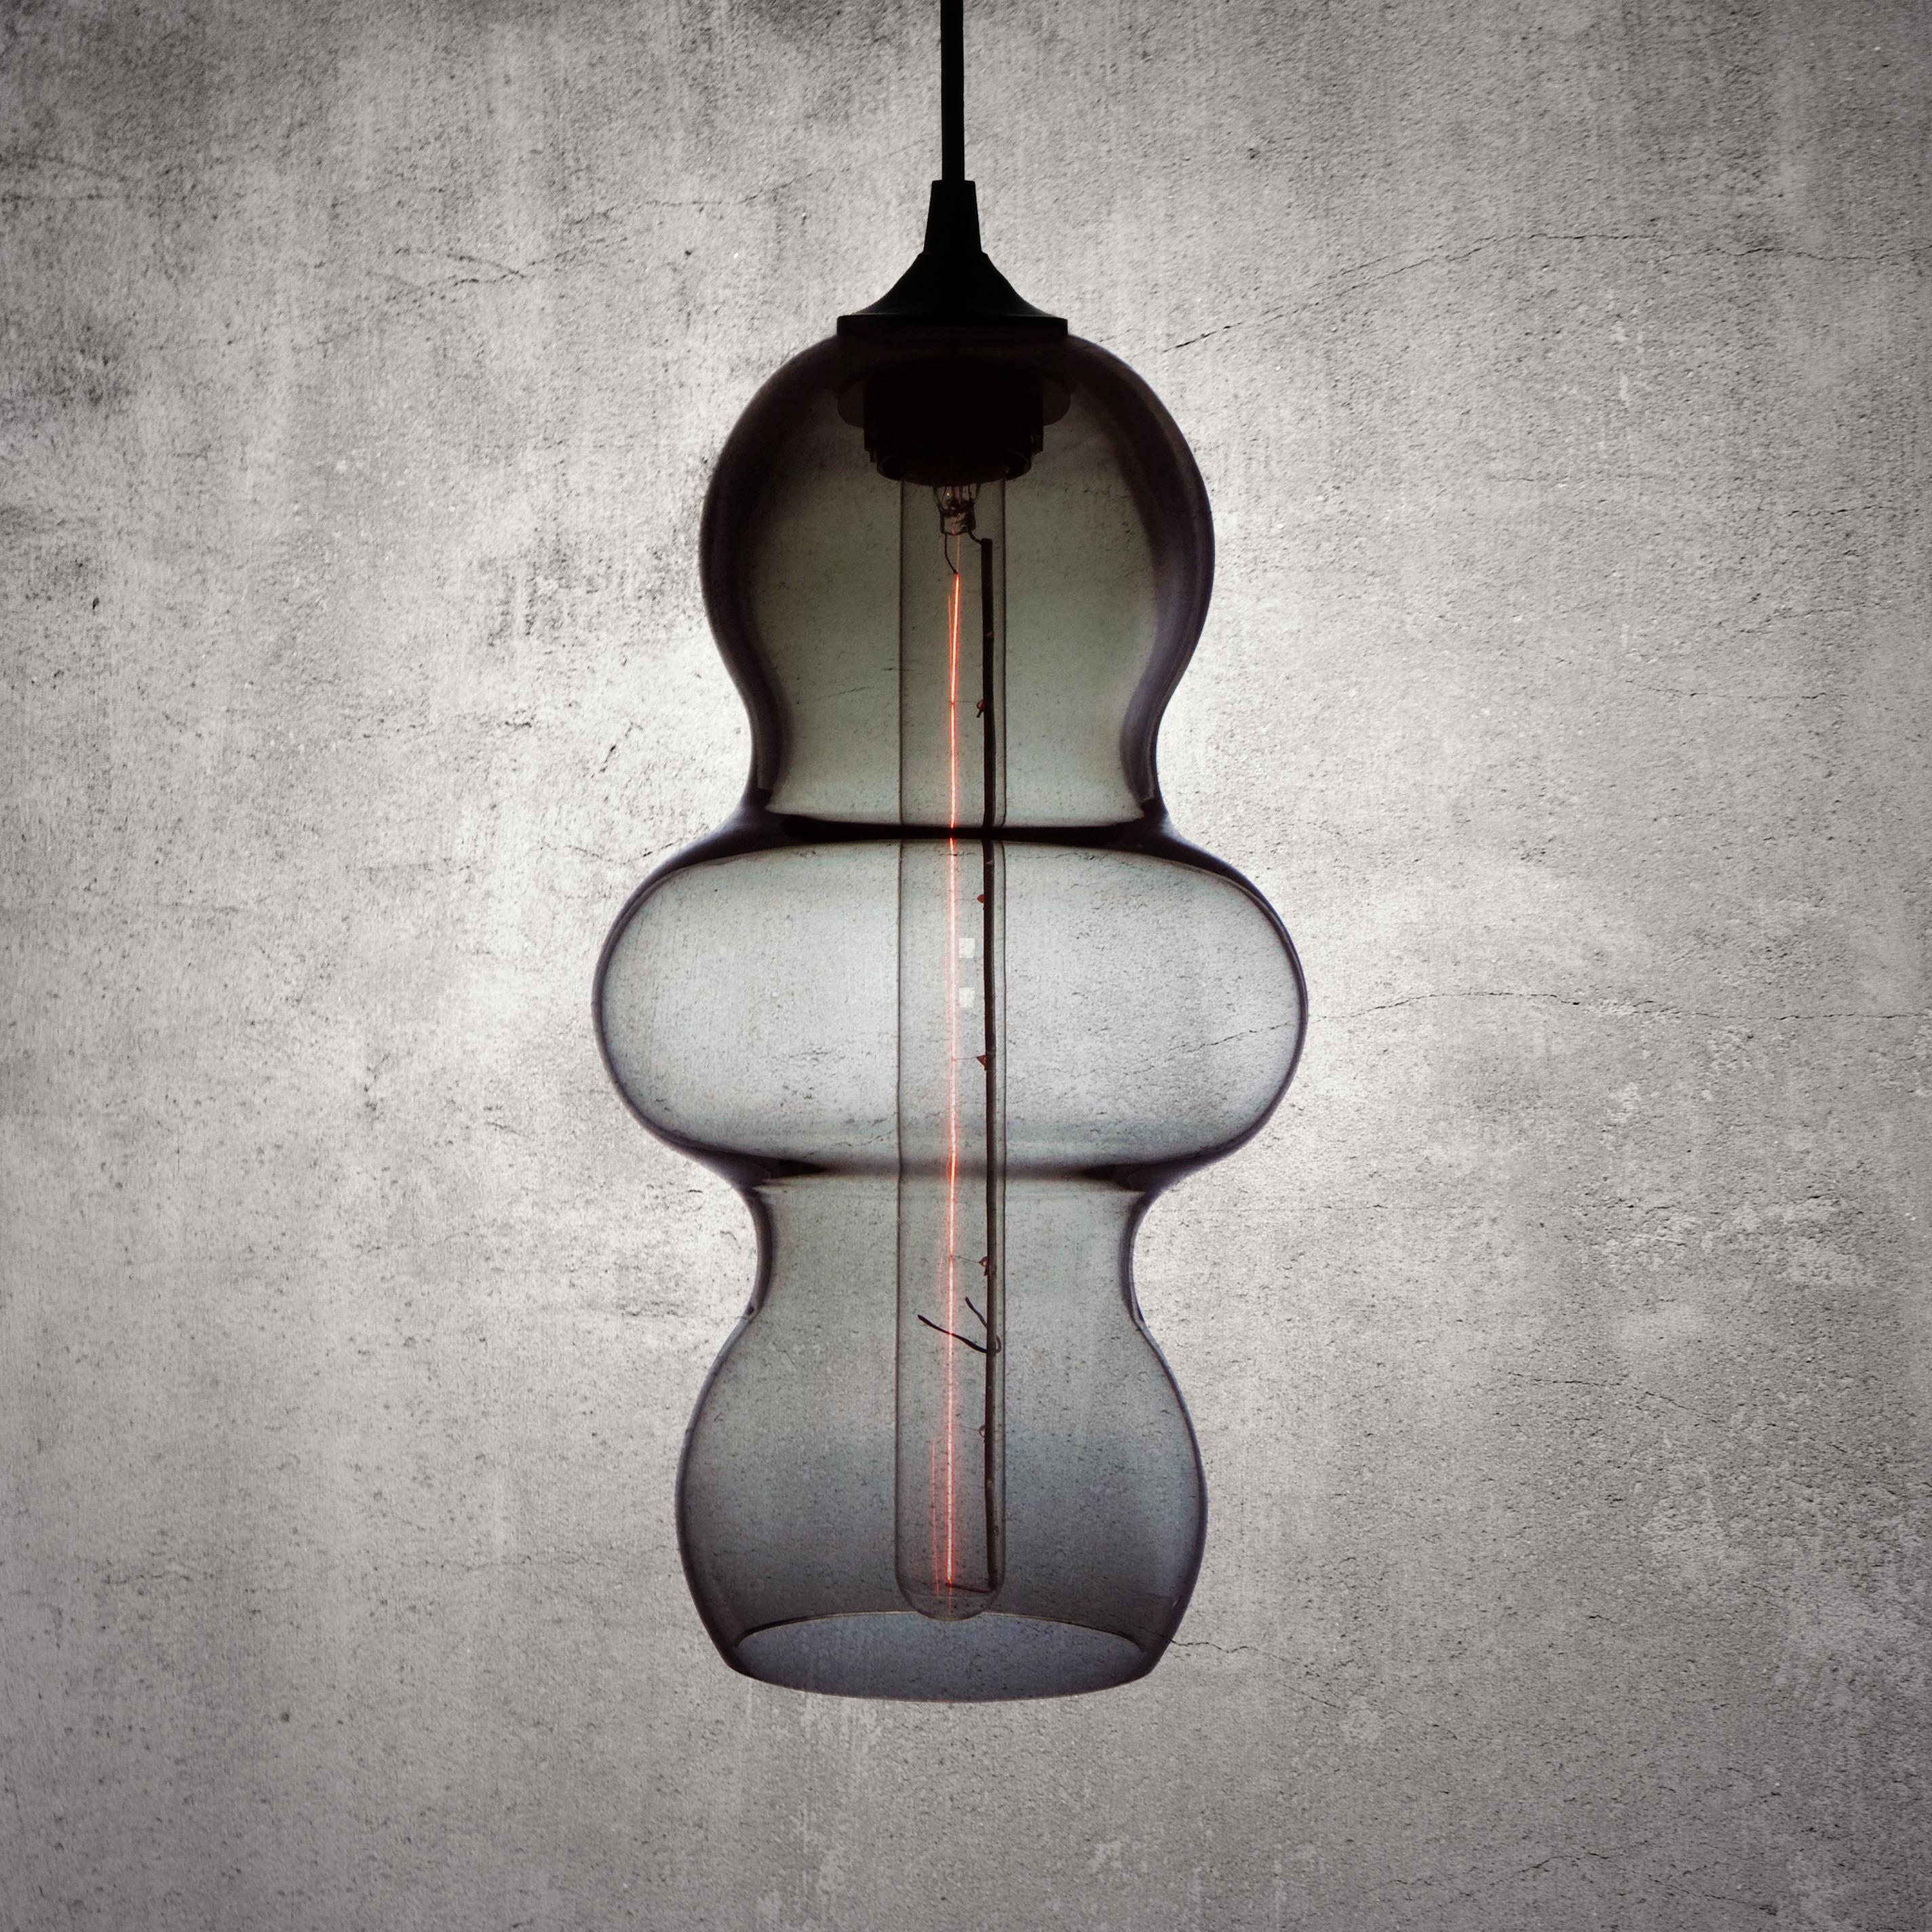 The Tamarindo contemporary glass pendant lamp is a contemporary interpretation of the tamarind fruit. Encapsulating its characteristics, the Tamarindo is sleek, curvaceous and light, hanging effortlessly with its long elongated form juxtaposed by a